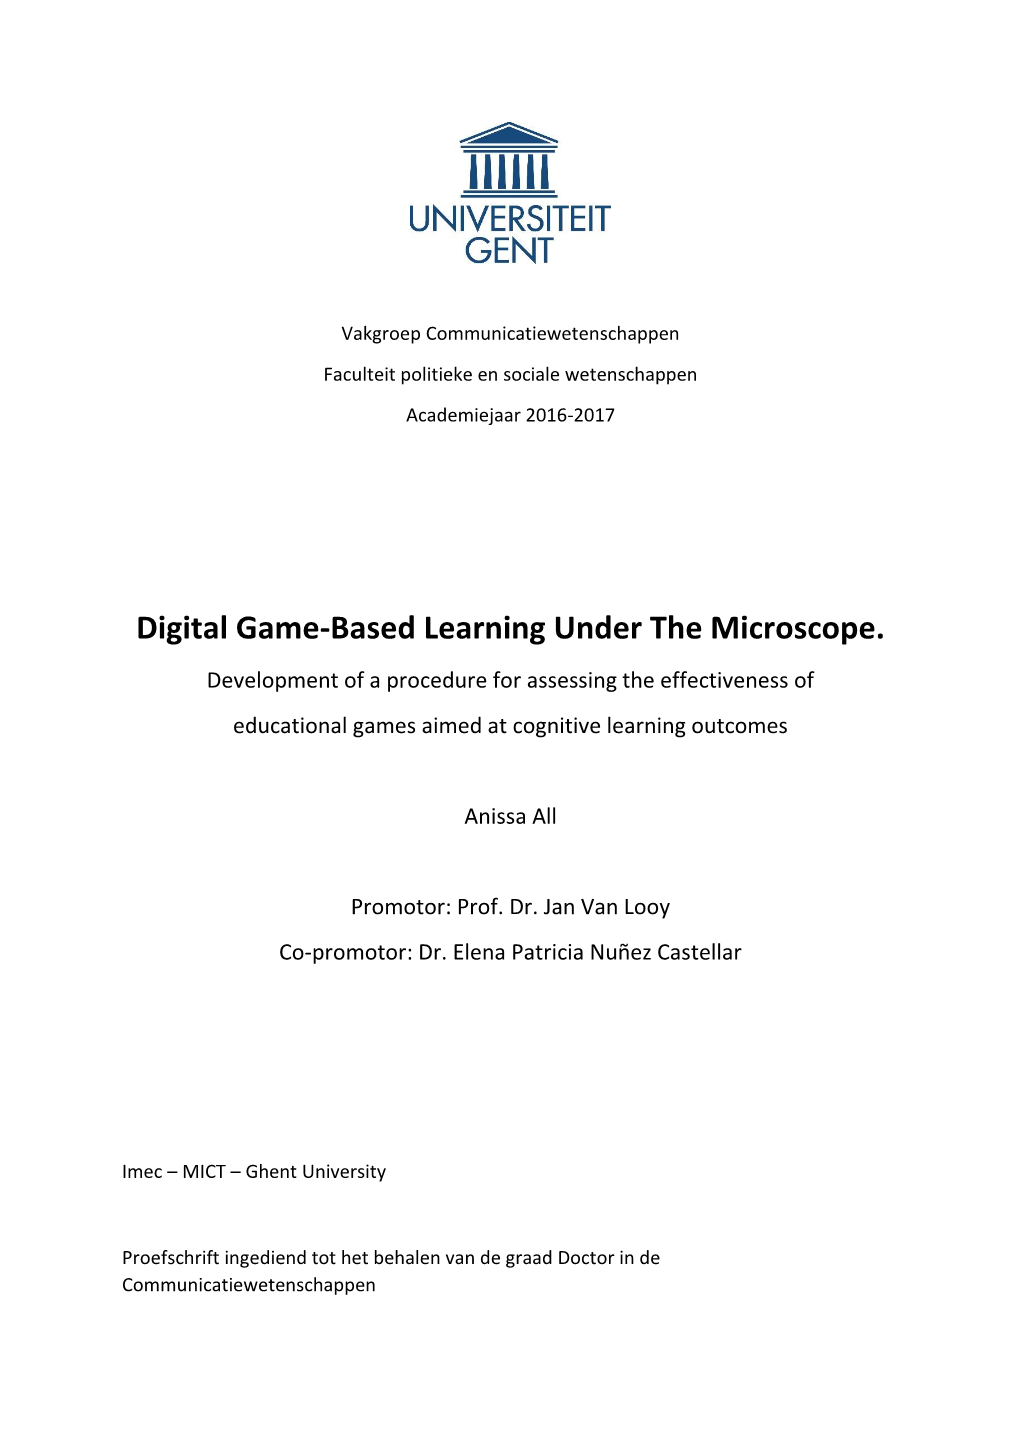 Digital Game-Based Learning Under the Microscope